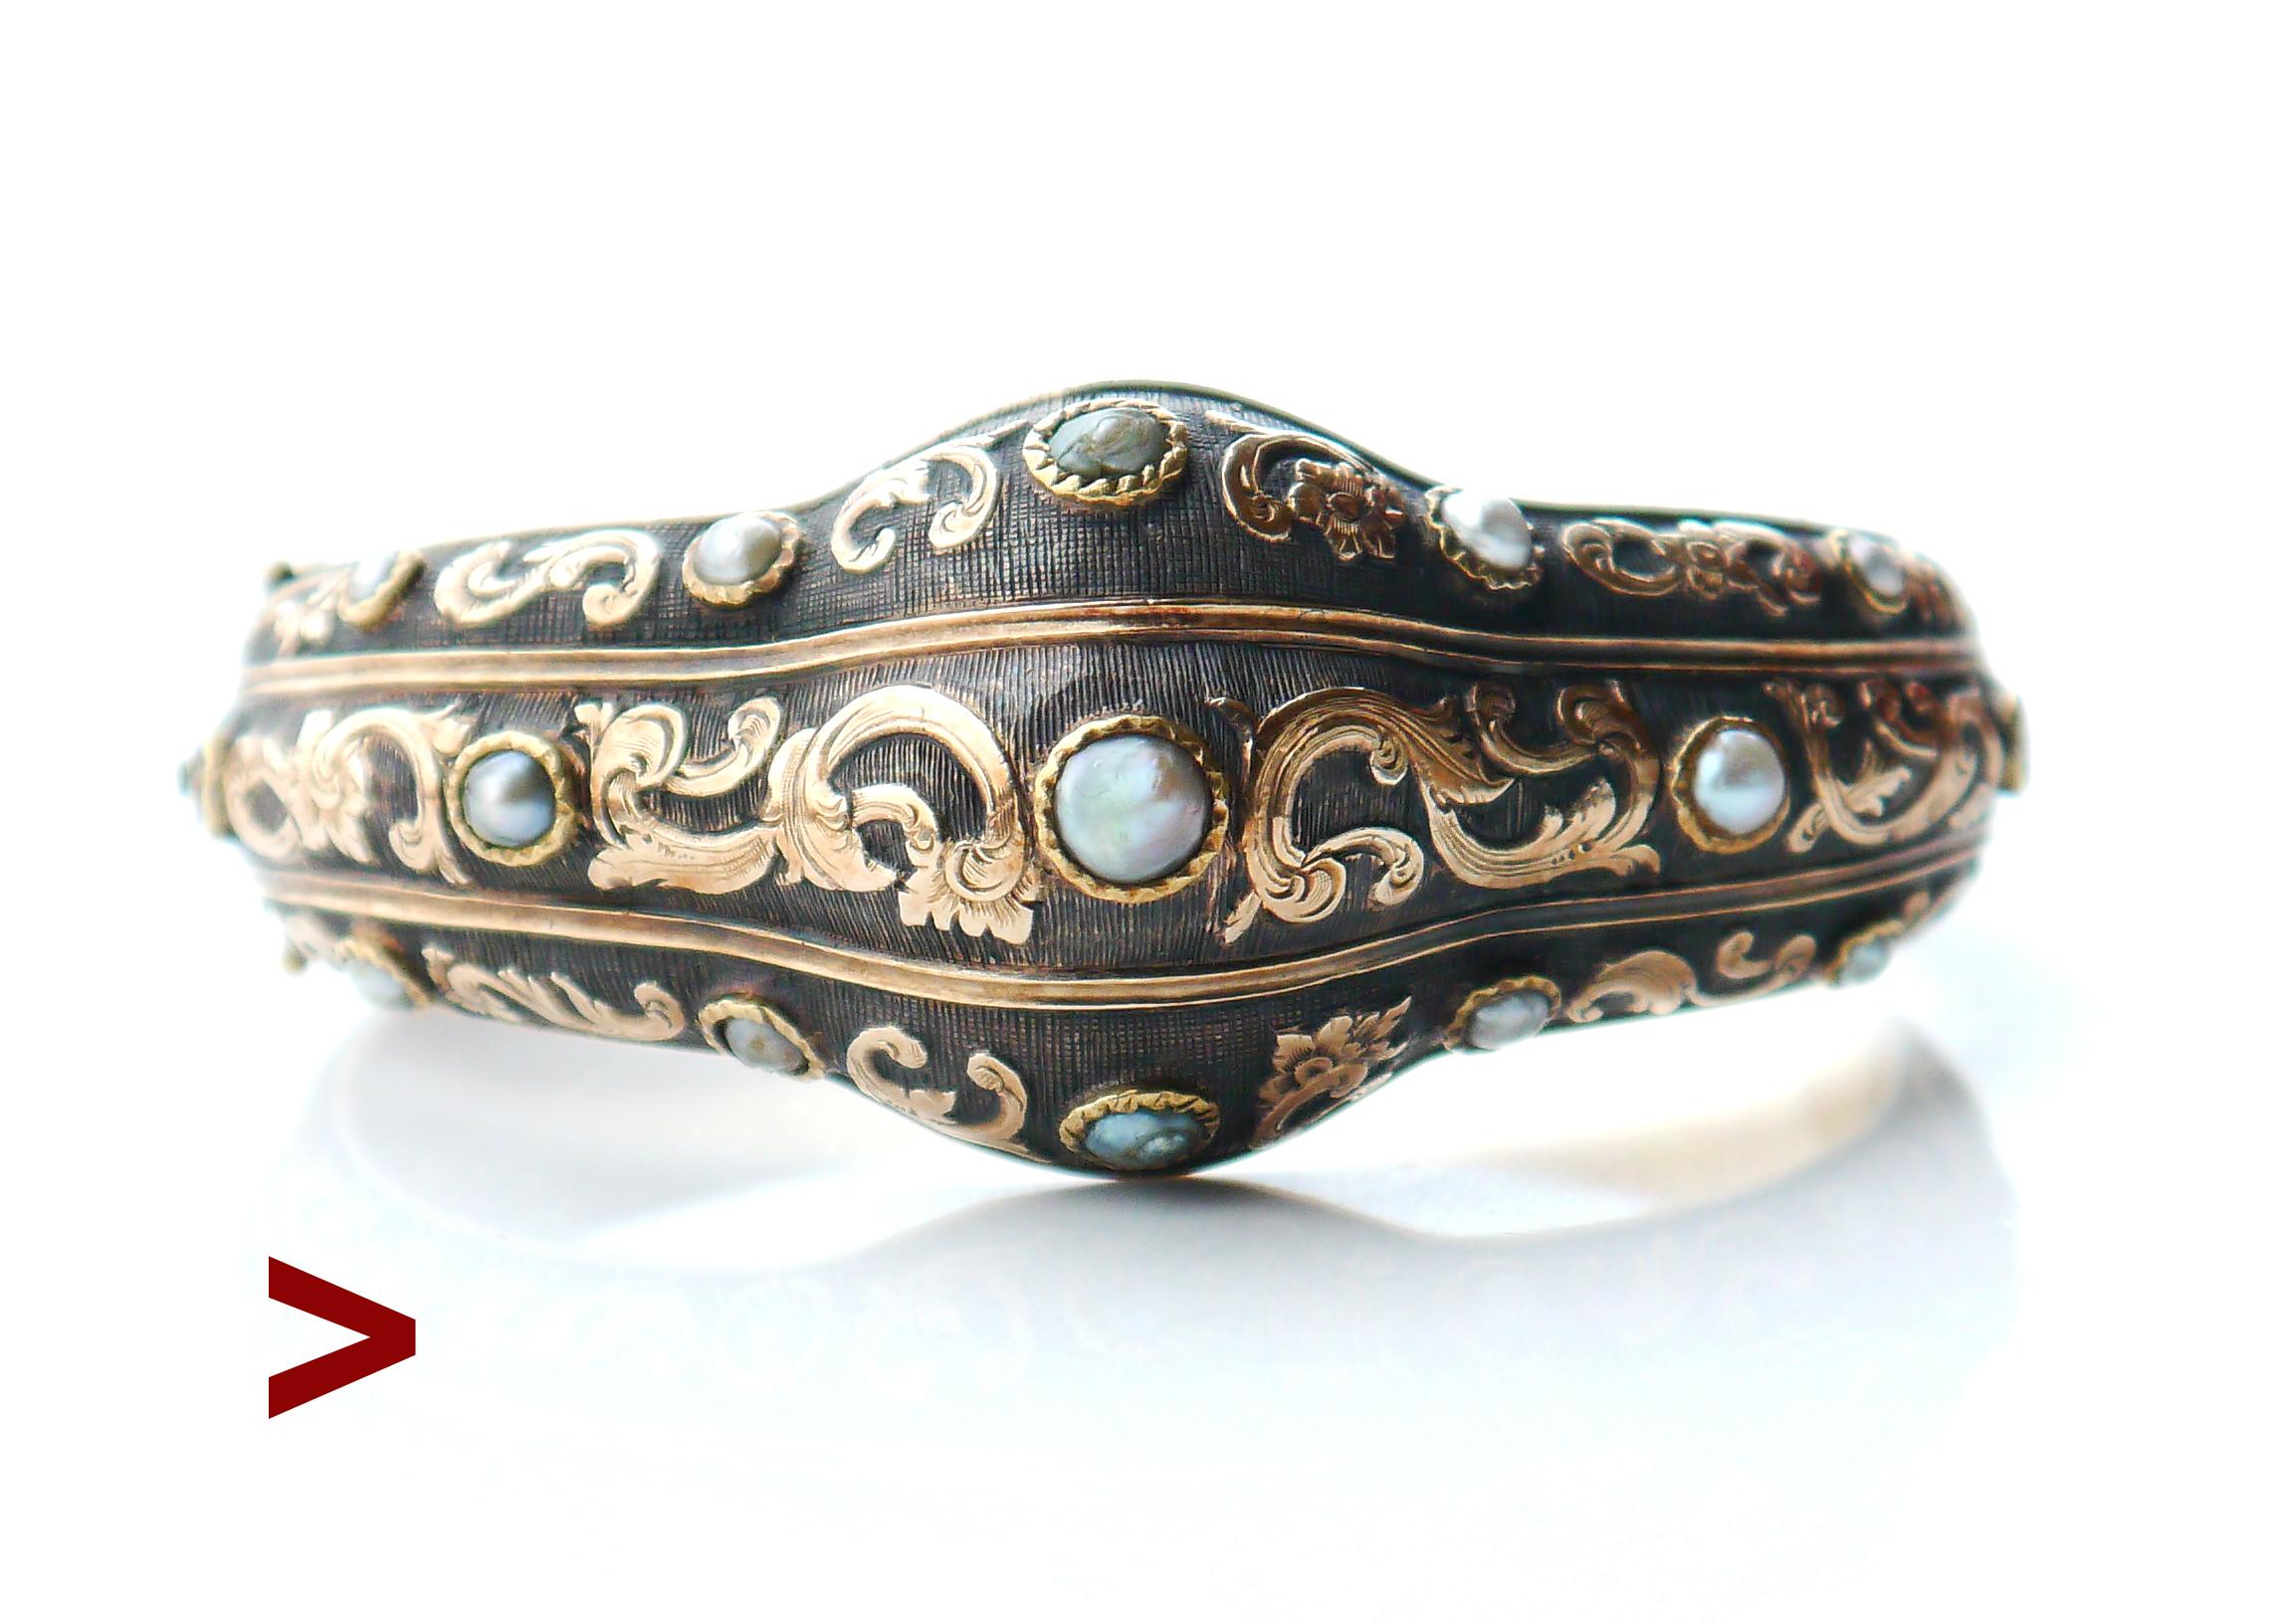 This Great old bangle bracelet, hand- made in Europe by very skilled jeweler, ca. 1880s - 1920s. Composite construction with frontal parts made of Silver on solid 14K Yellow and Rose Gold. Carved floral ornamentation in Rose Gold over Silver